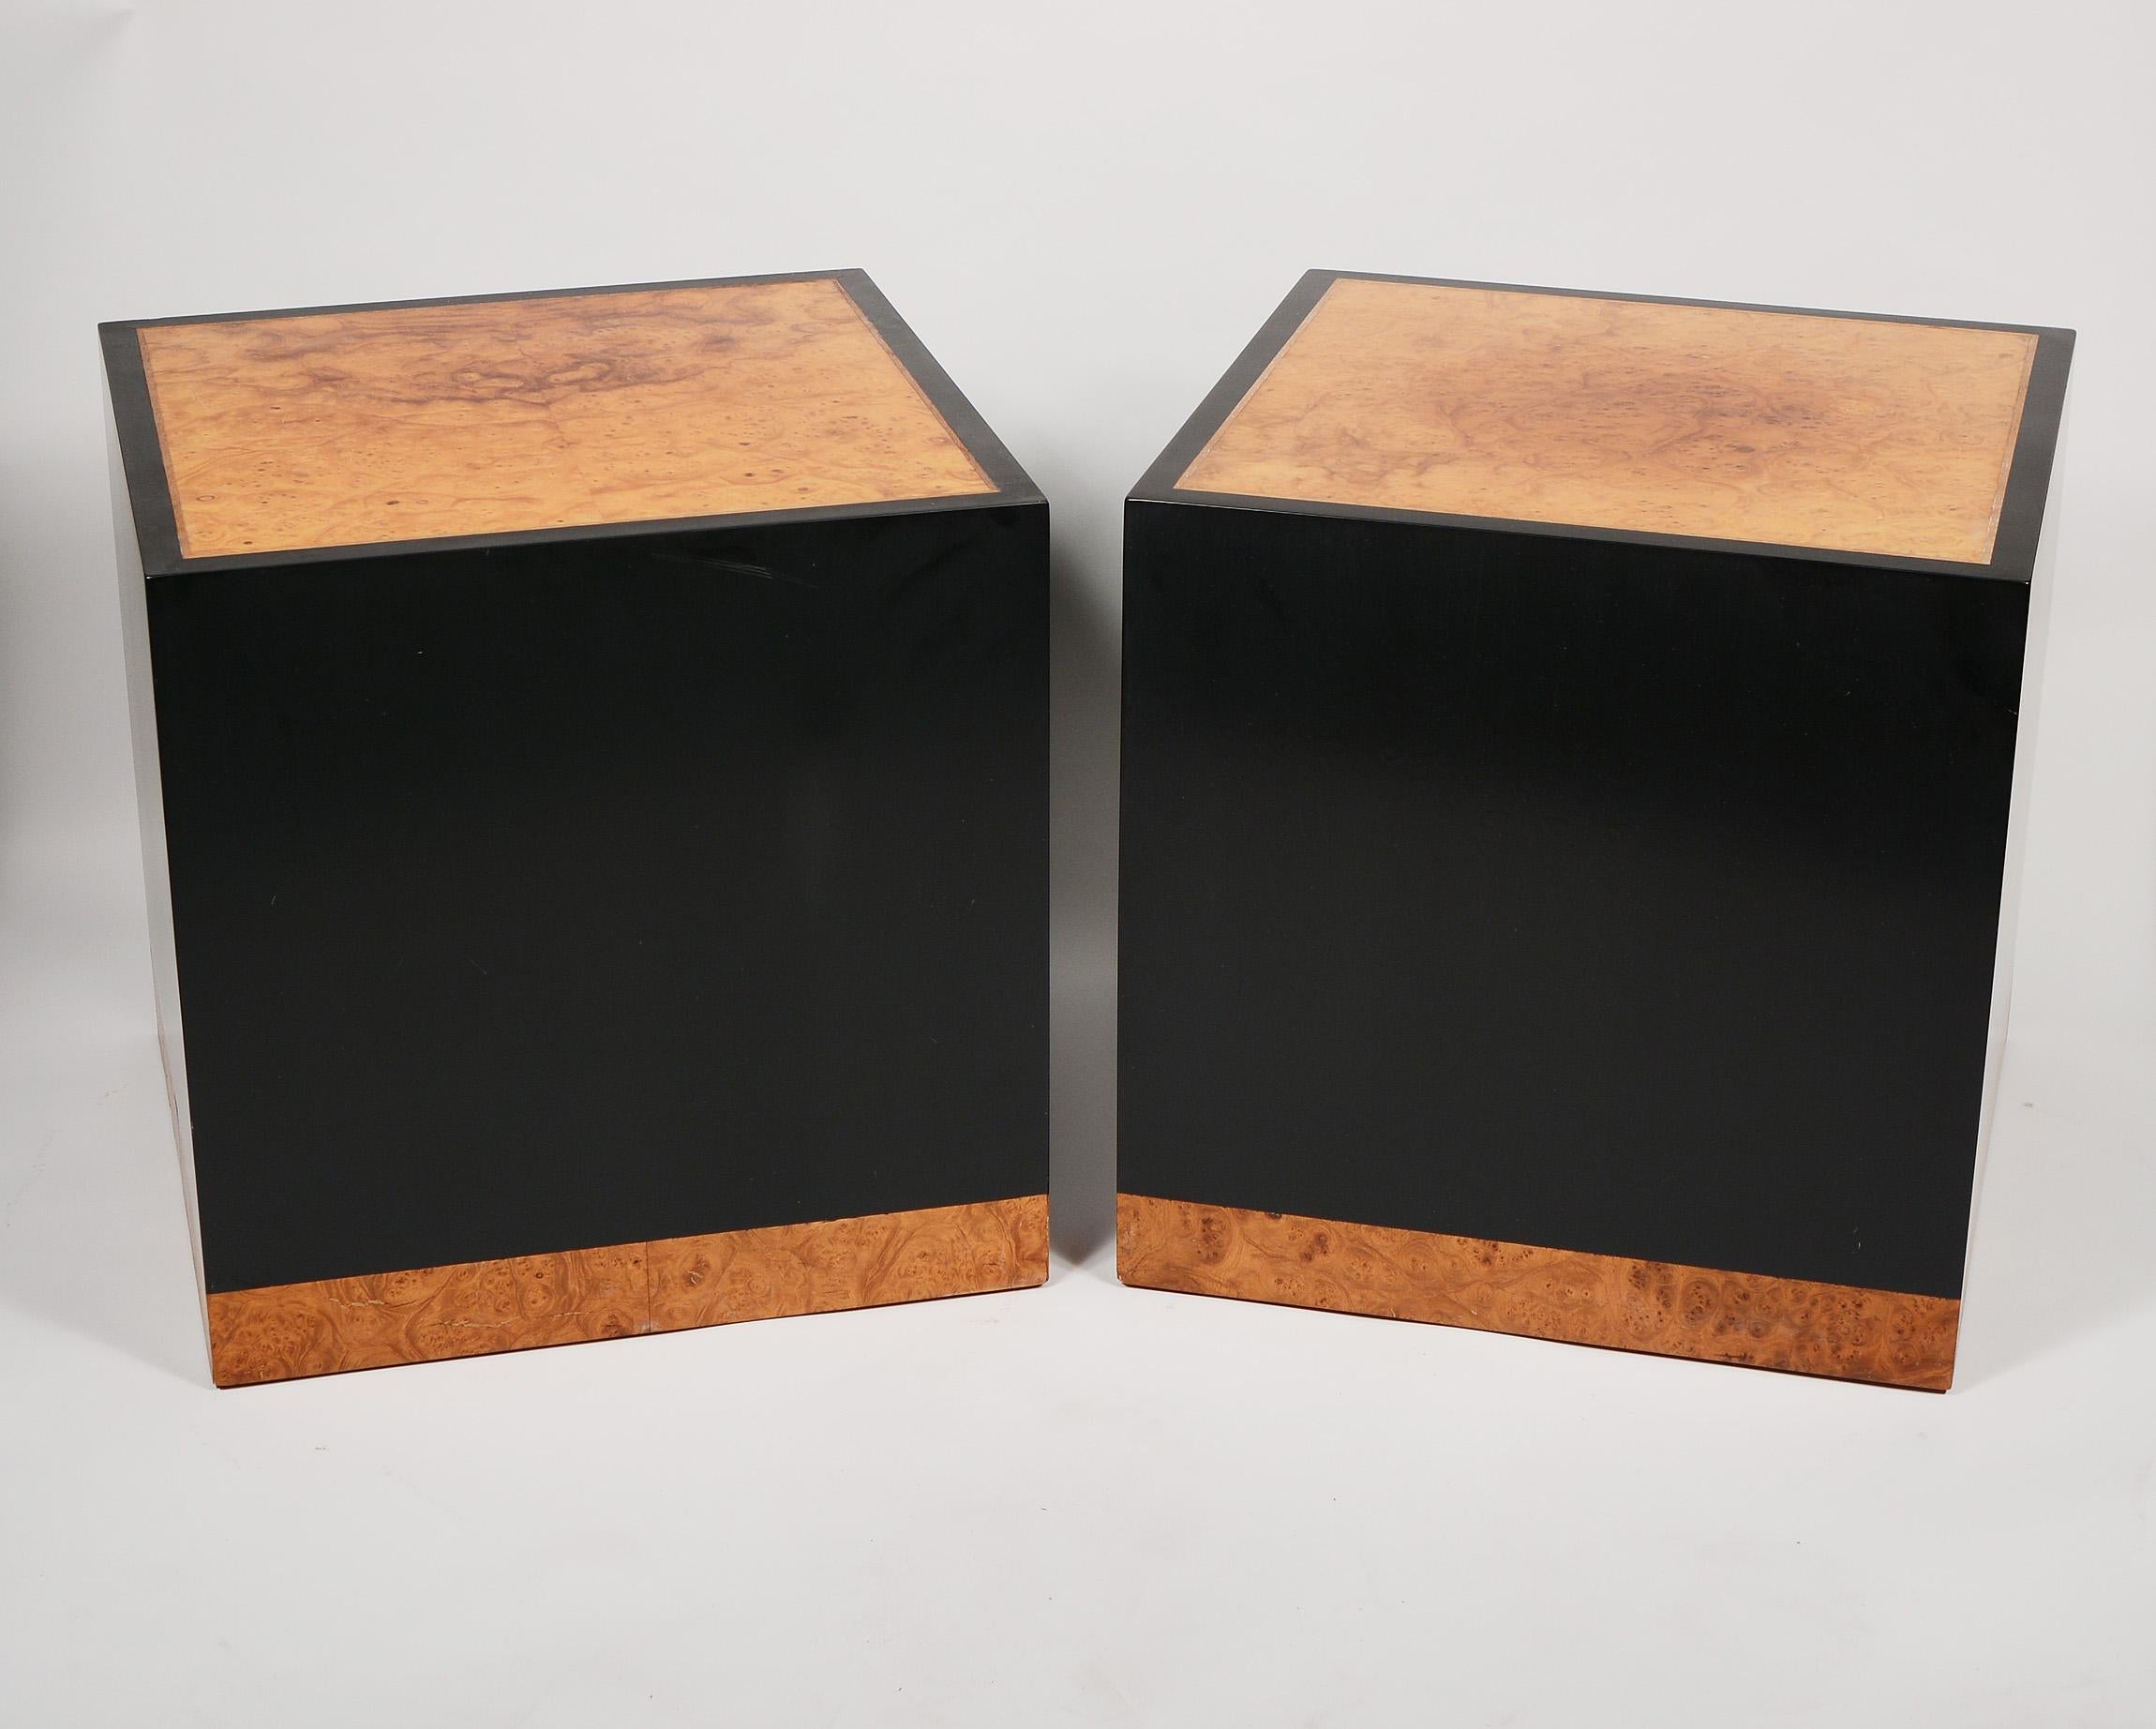 Cube side tables or pedestals made by Dunbar. Edward Wormley designed these unusual and uncommon tables. These have a birds eye maple burl top and band along the bottom. The black is a resin material. The maple inset in the top has a clear resin